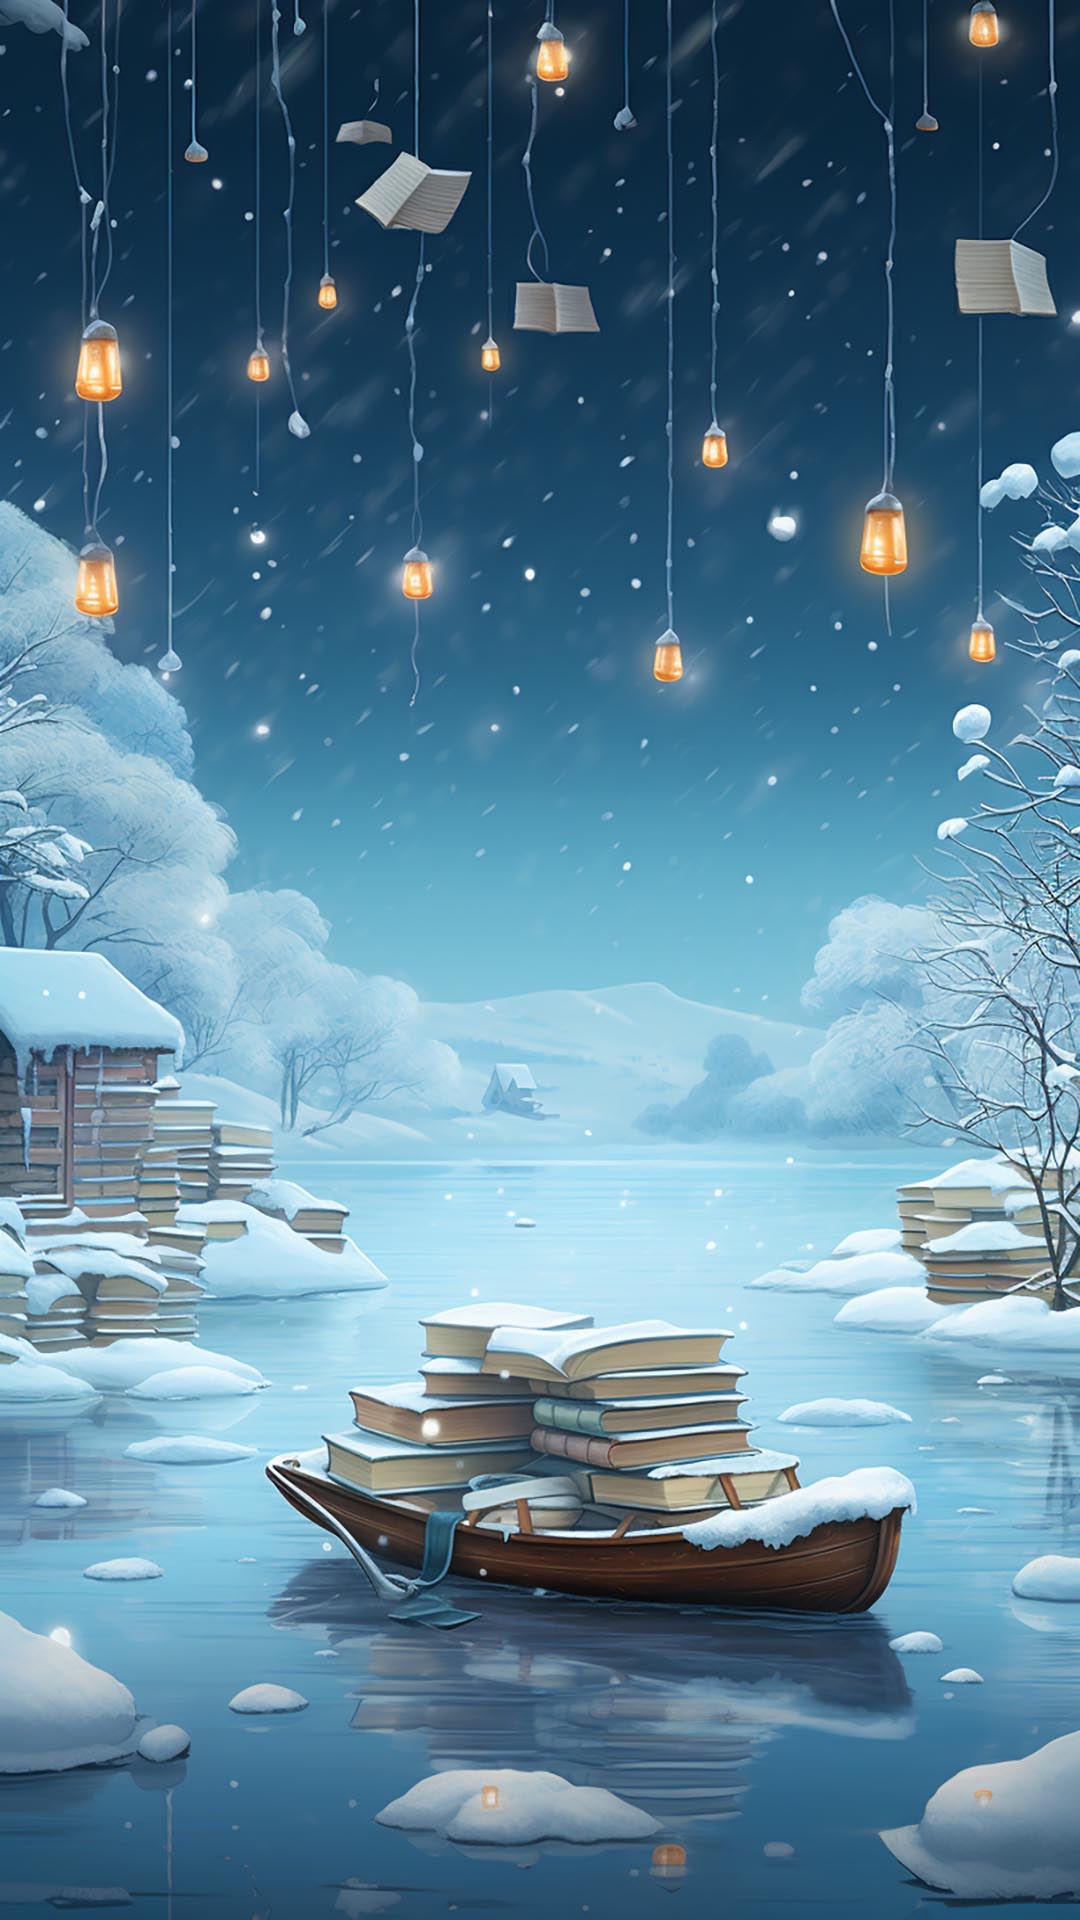 Snowy night with lanterns and books near water wallpaper